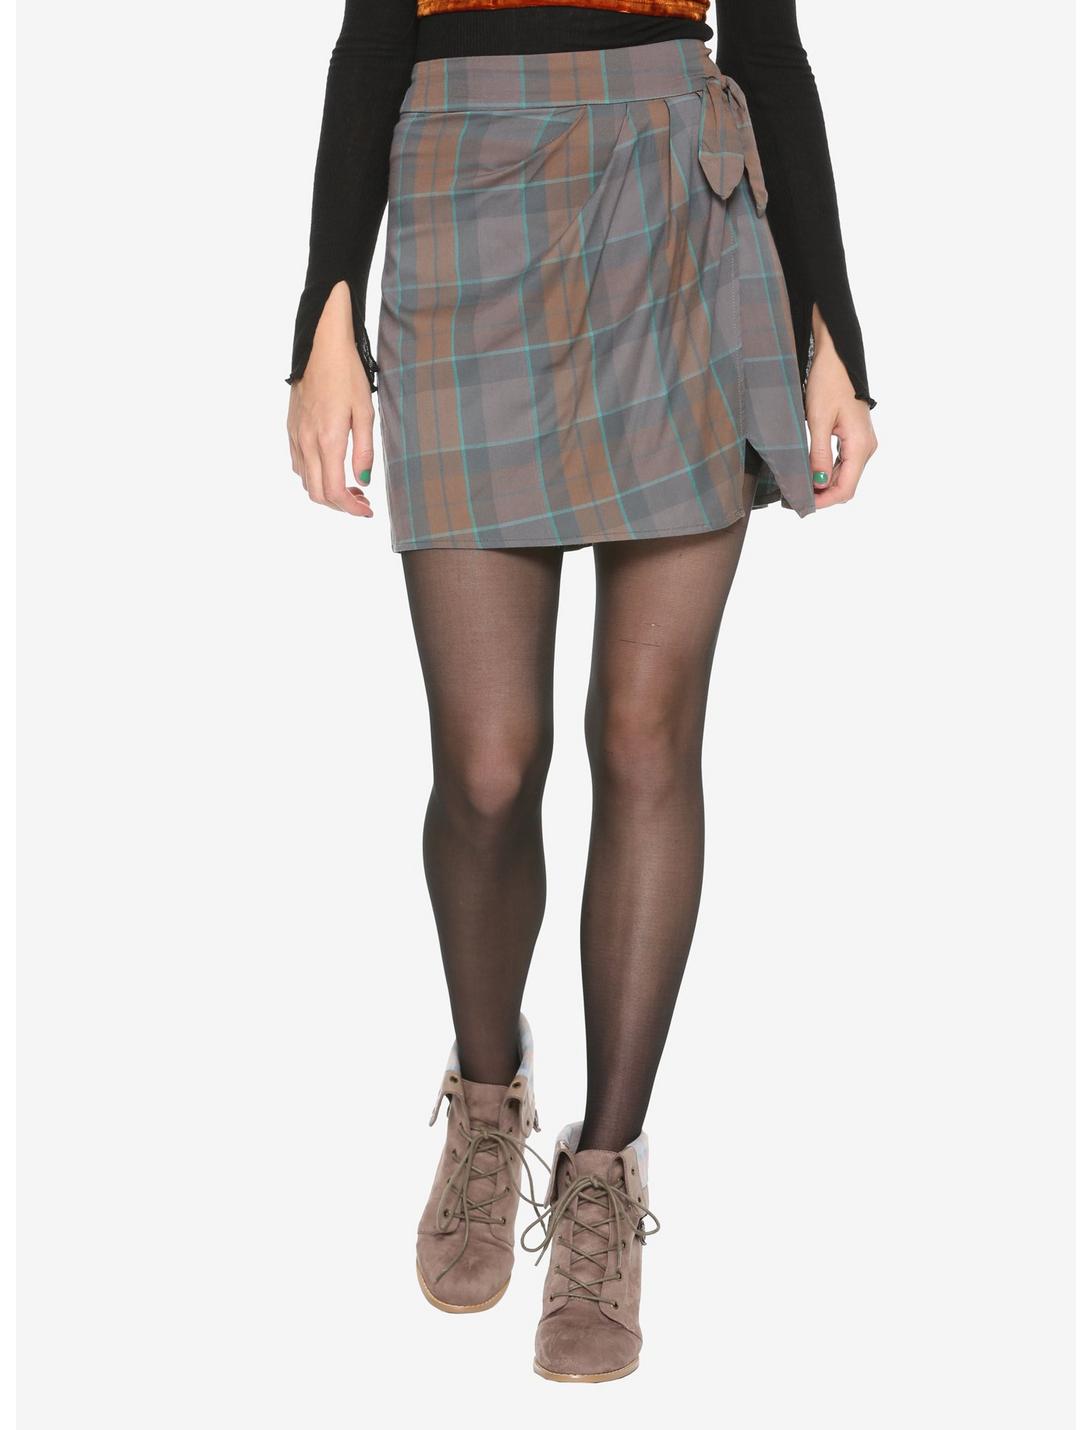 Outlander Faux Side-Tie Skirt Hot Topic Exclusive, PLAID, hi-res